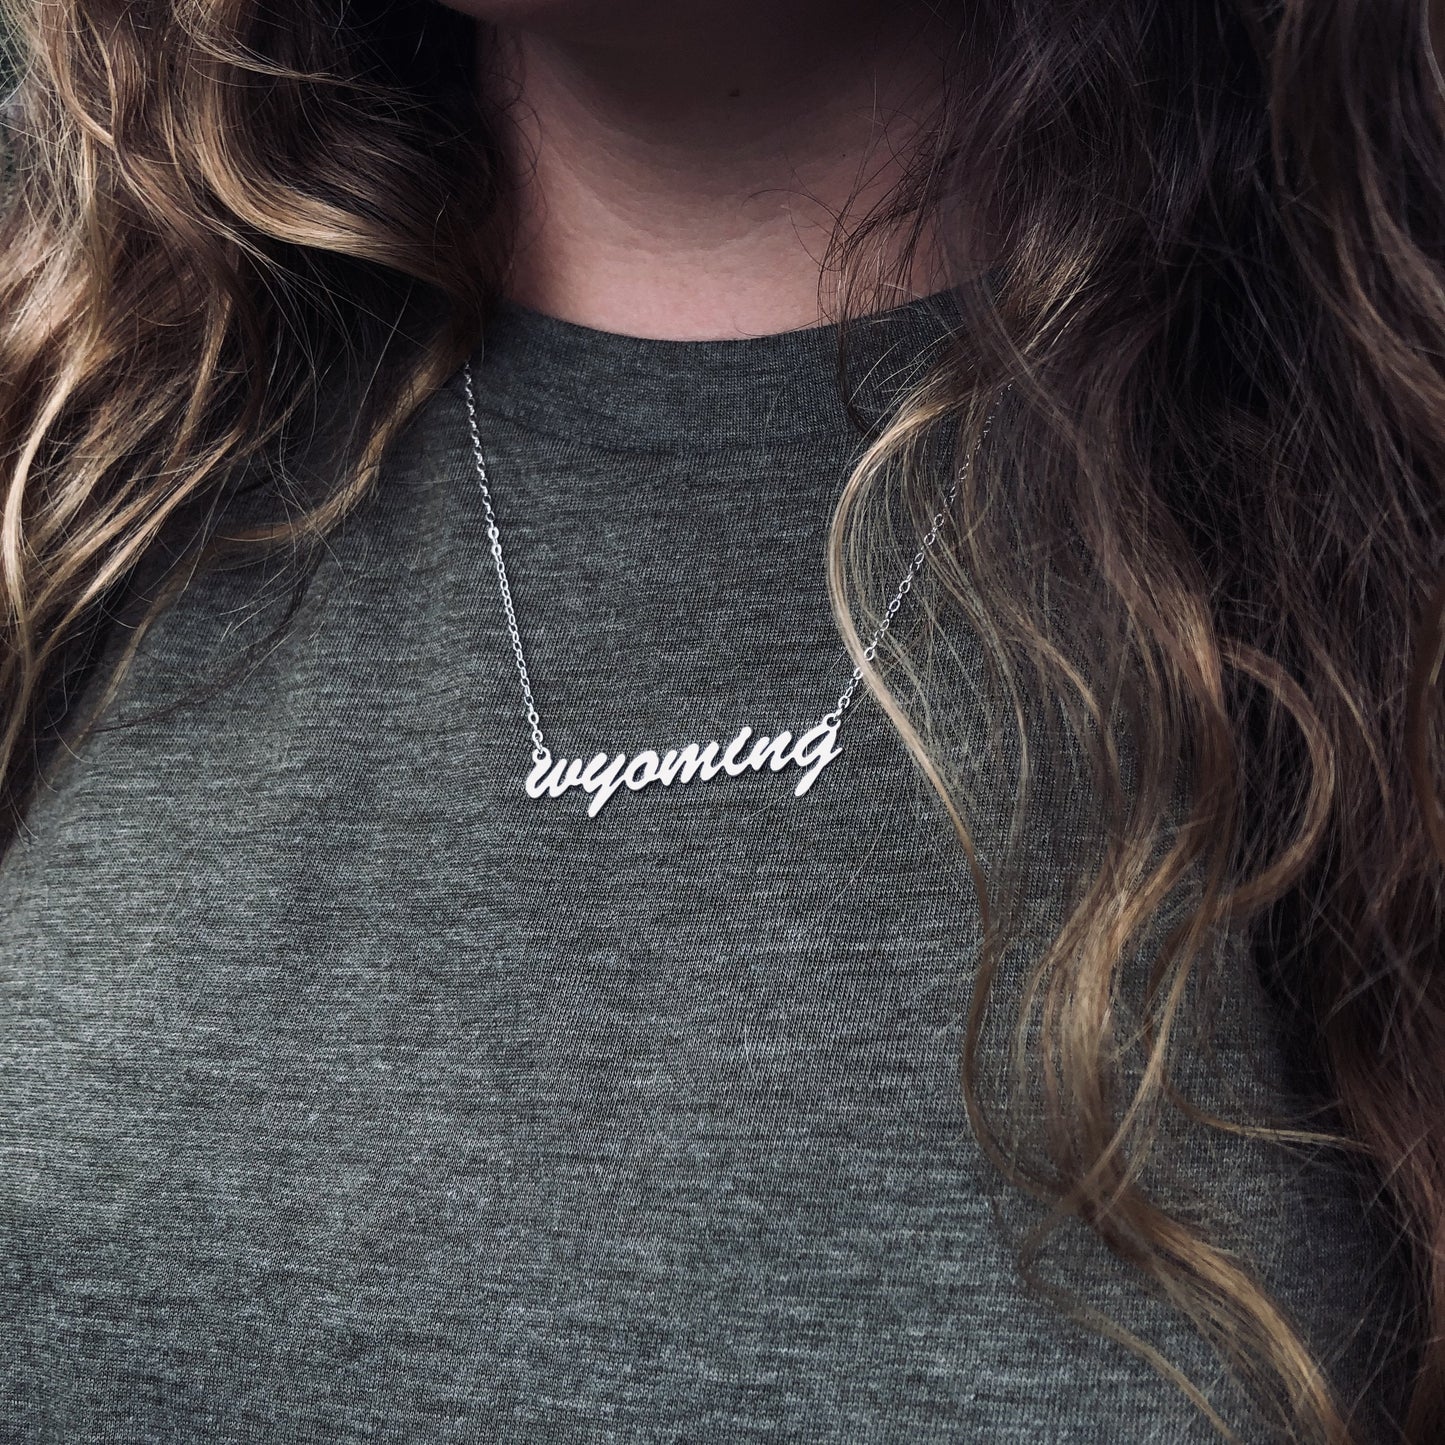 Wyoming Script Necklace